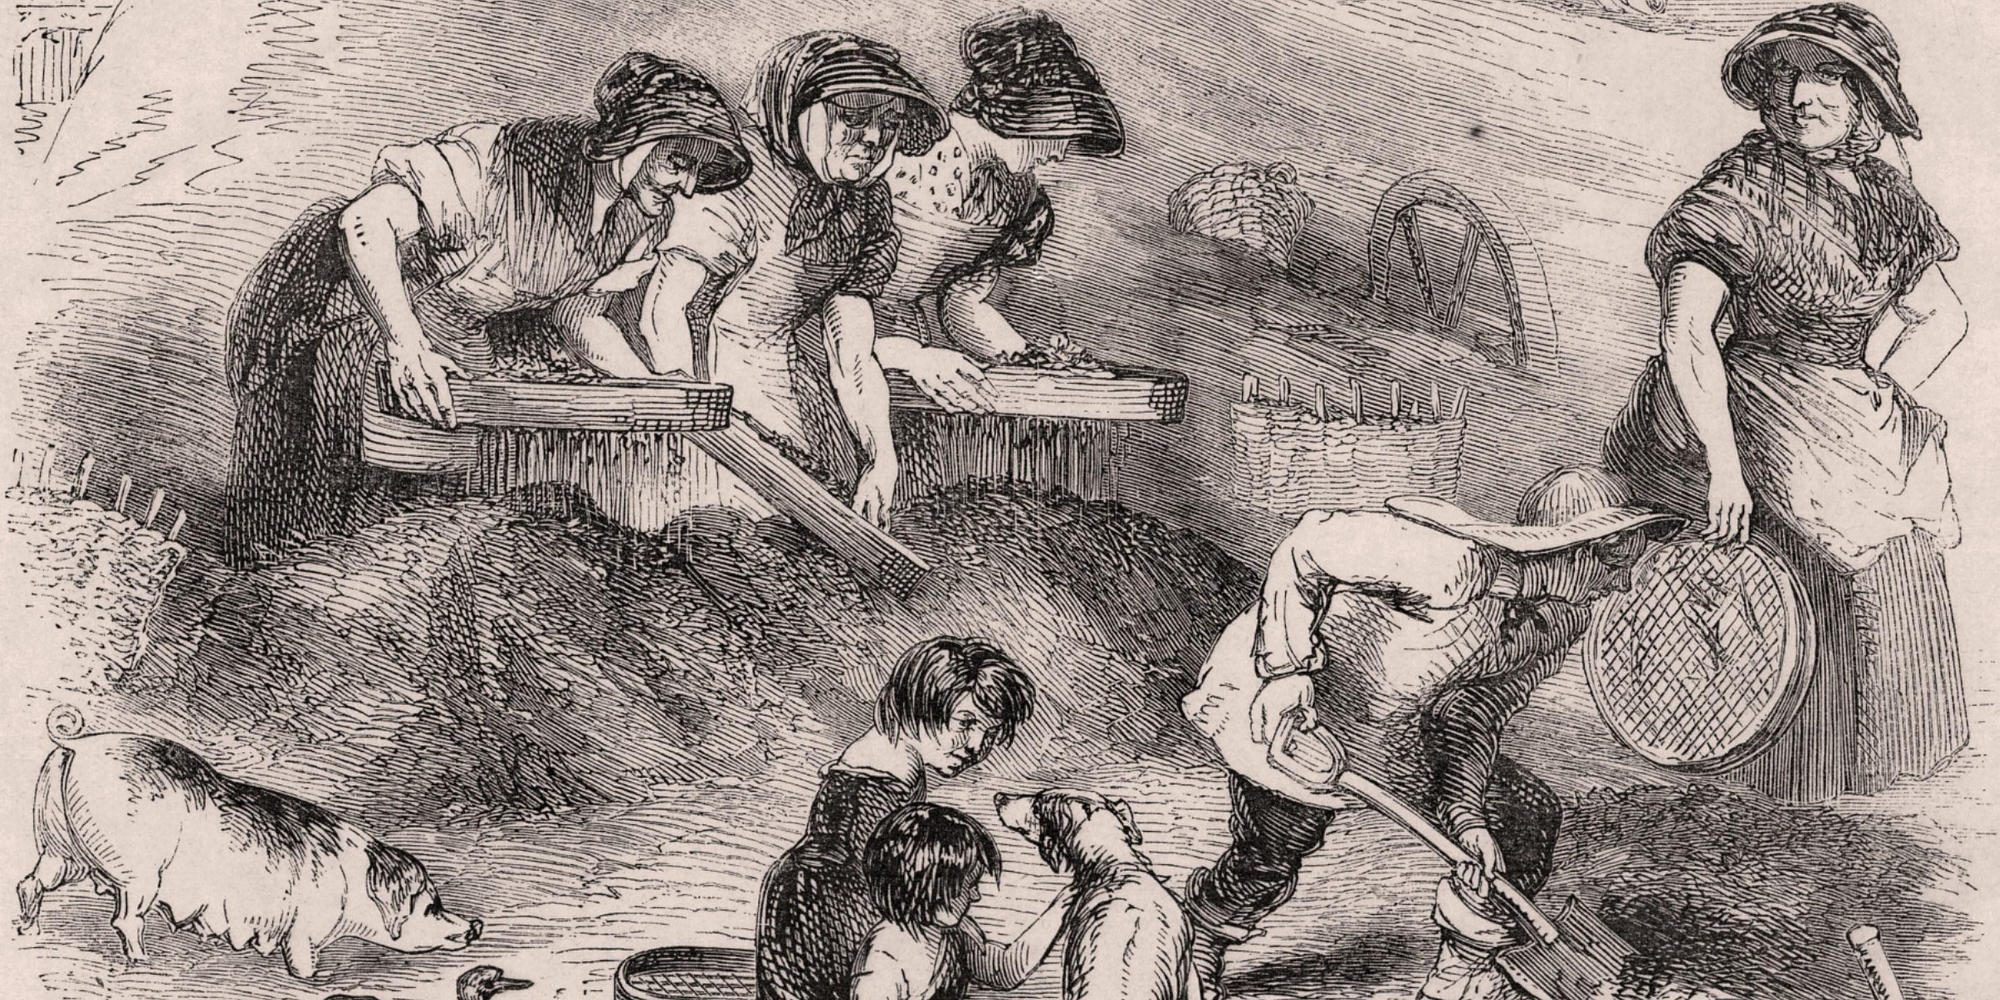 Women and children sifting household refuse in a dust yard in order to salvage anything that could be recycled, such as the pile of bones in the right foreground which would be taken to the glue factory. Engraving from 'London Labour and the London Poor'